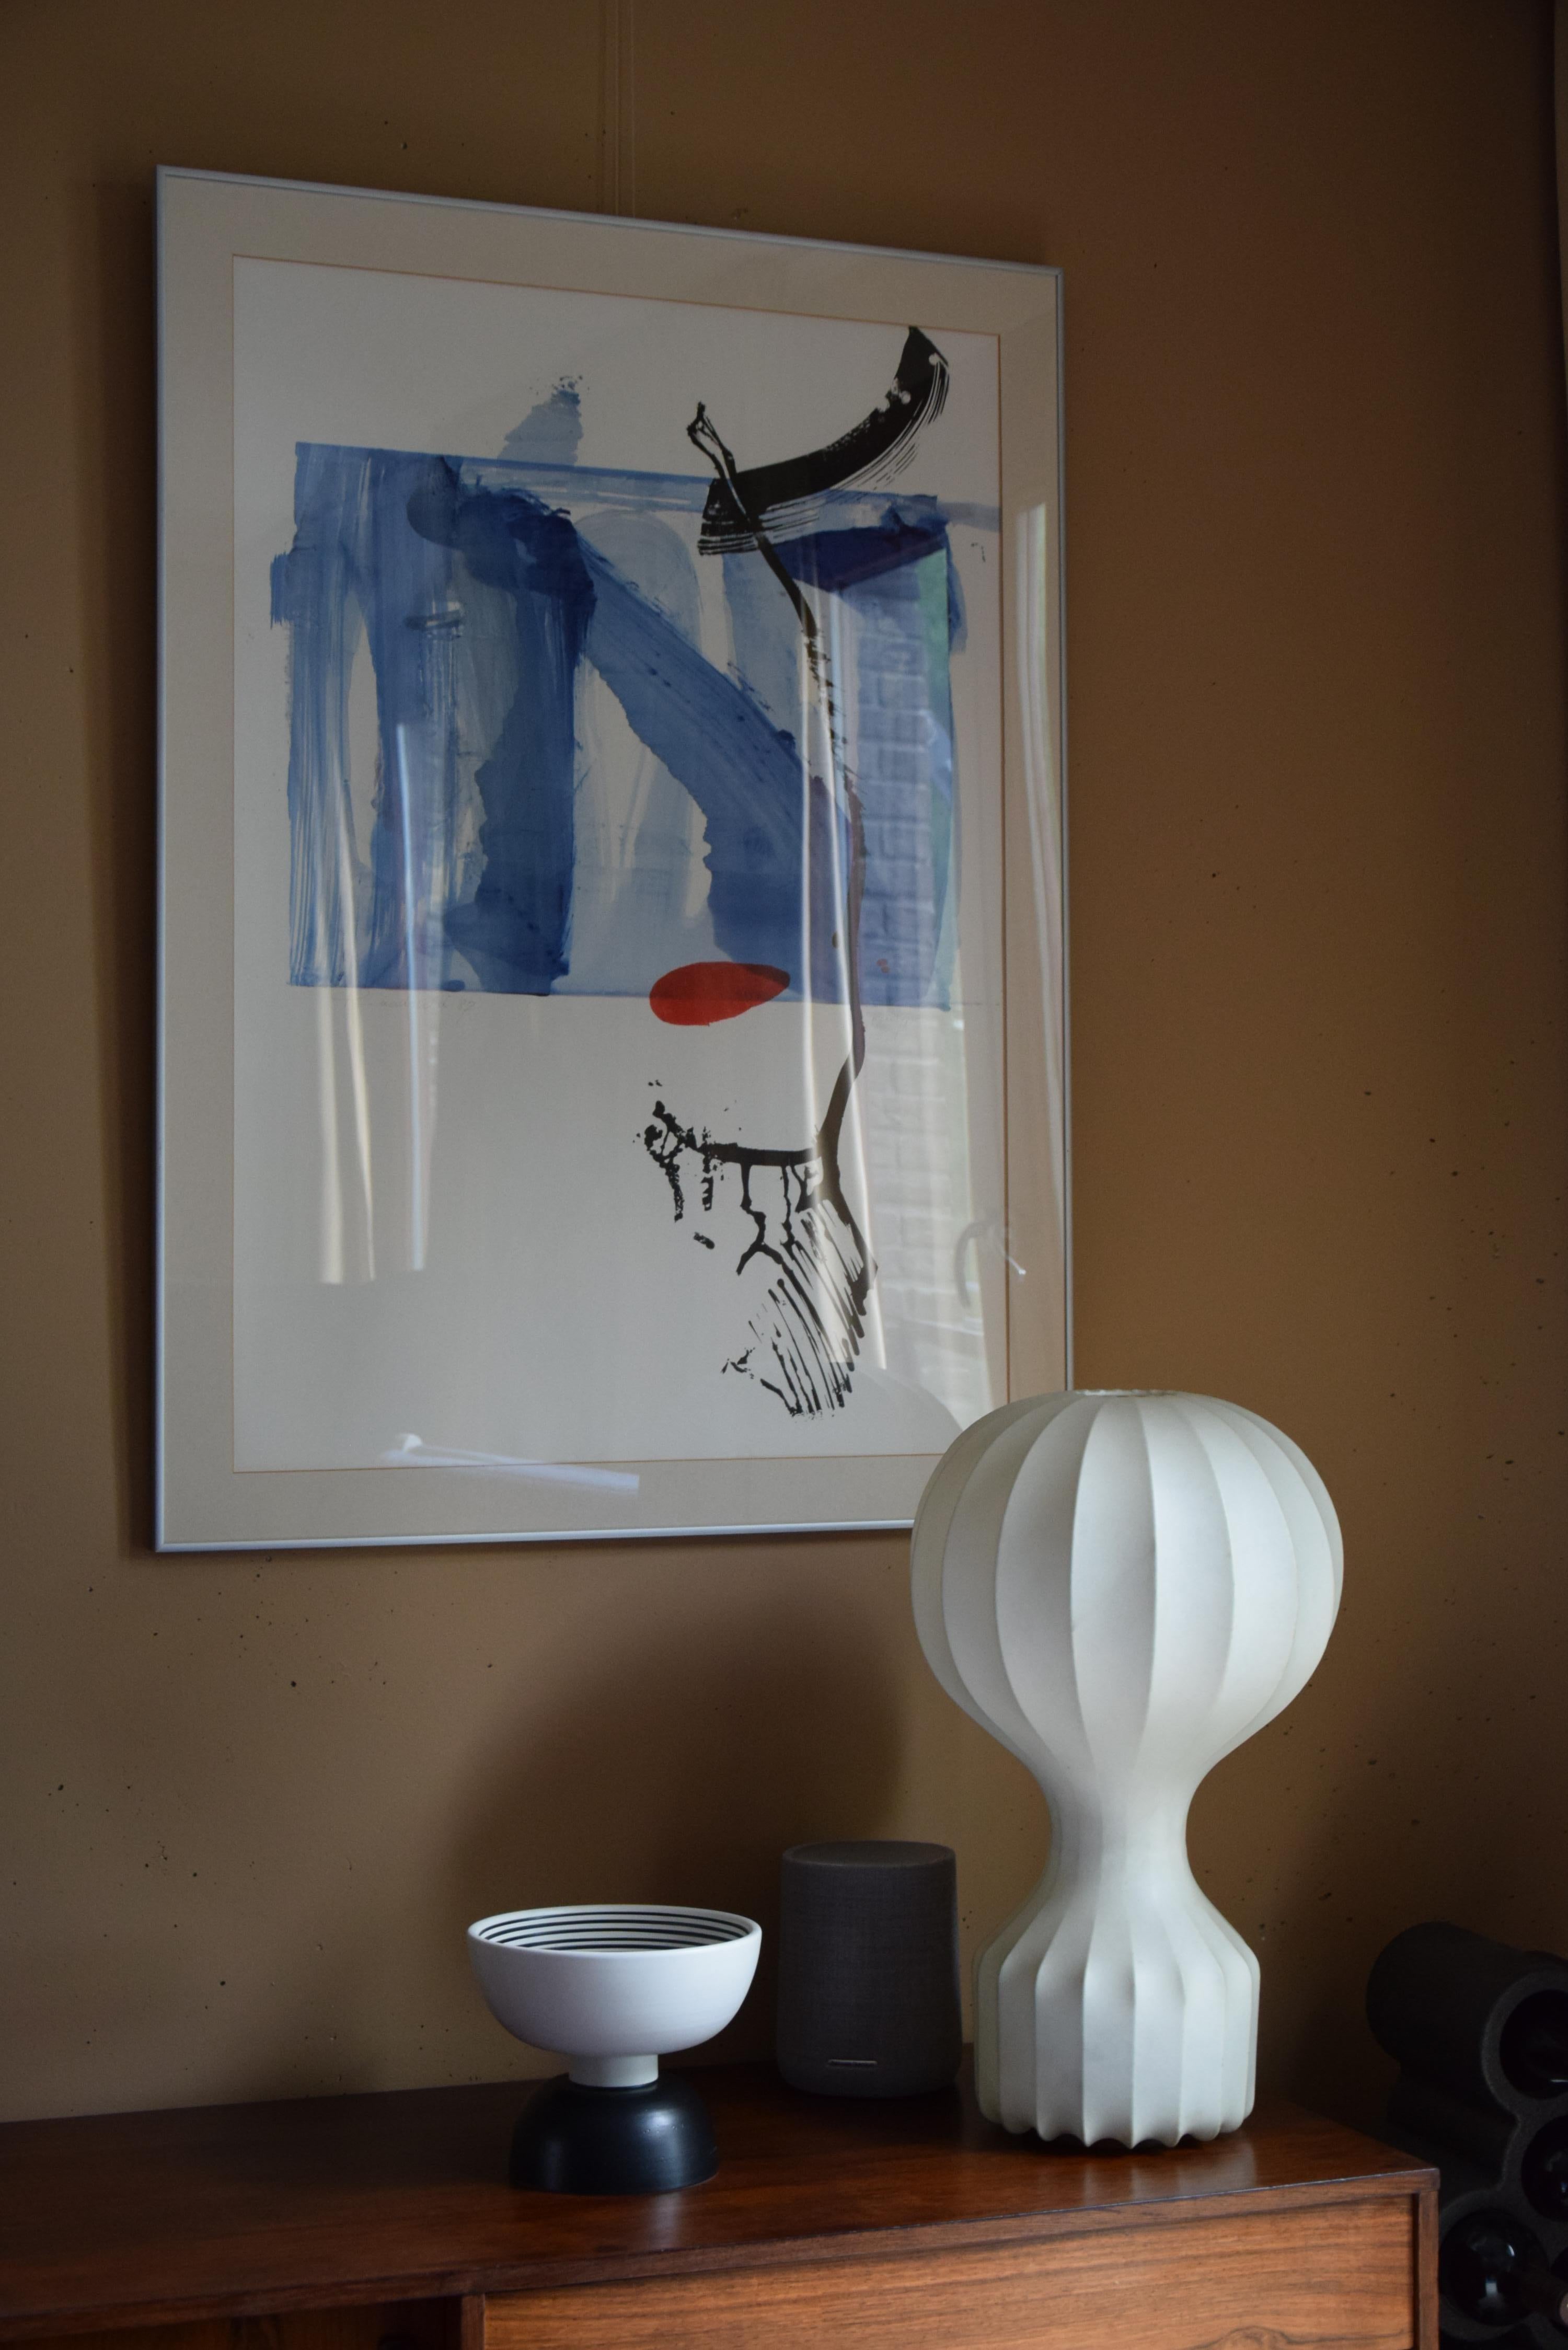 One of a kind painting with beautiful brush strokes in Blue and Black. These in combination with the red dots give this art work a Japanese sensation. A happy and pleasant piece to have on the wall.
Carla Raadsveld was born in Rotterdam, the